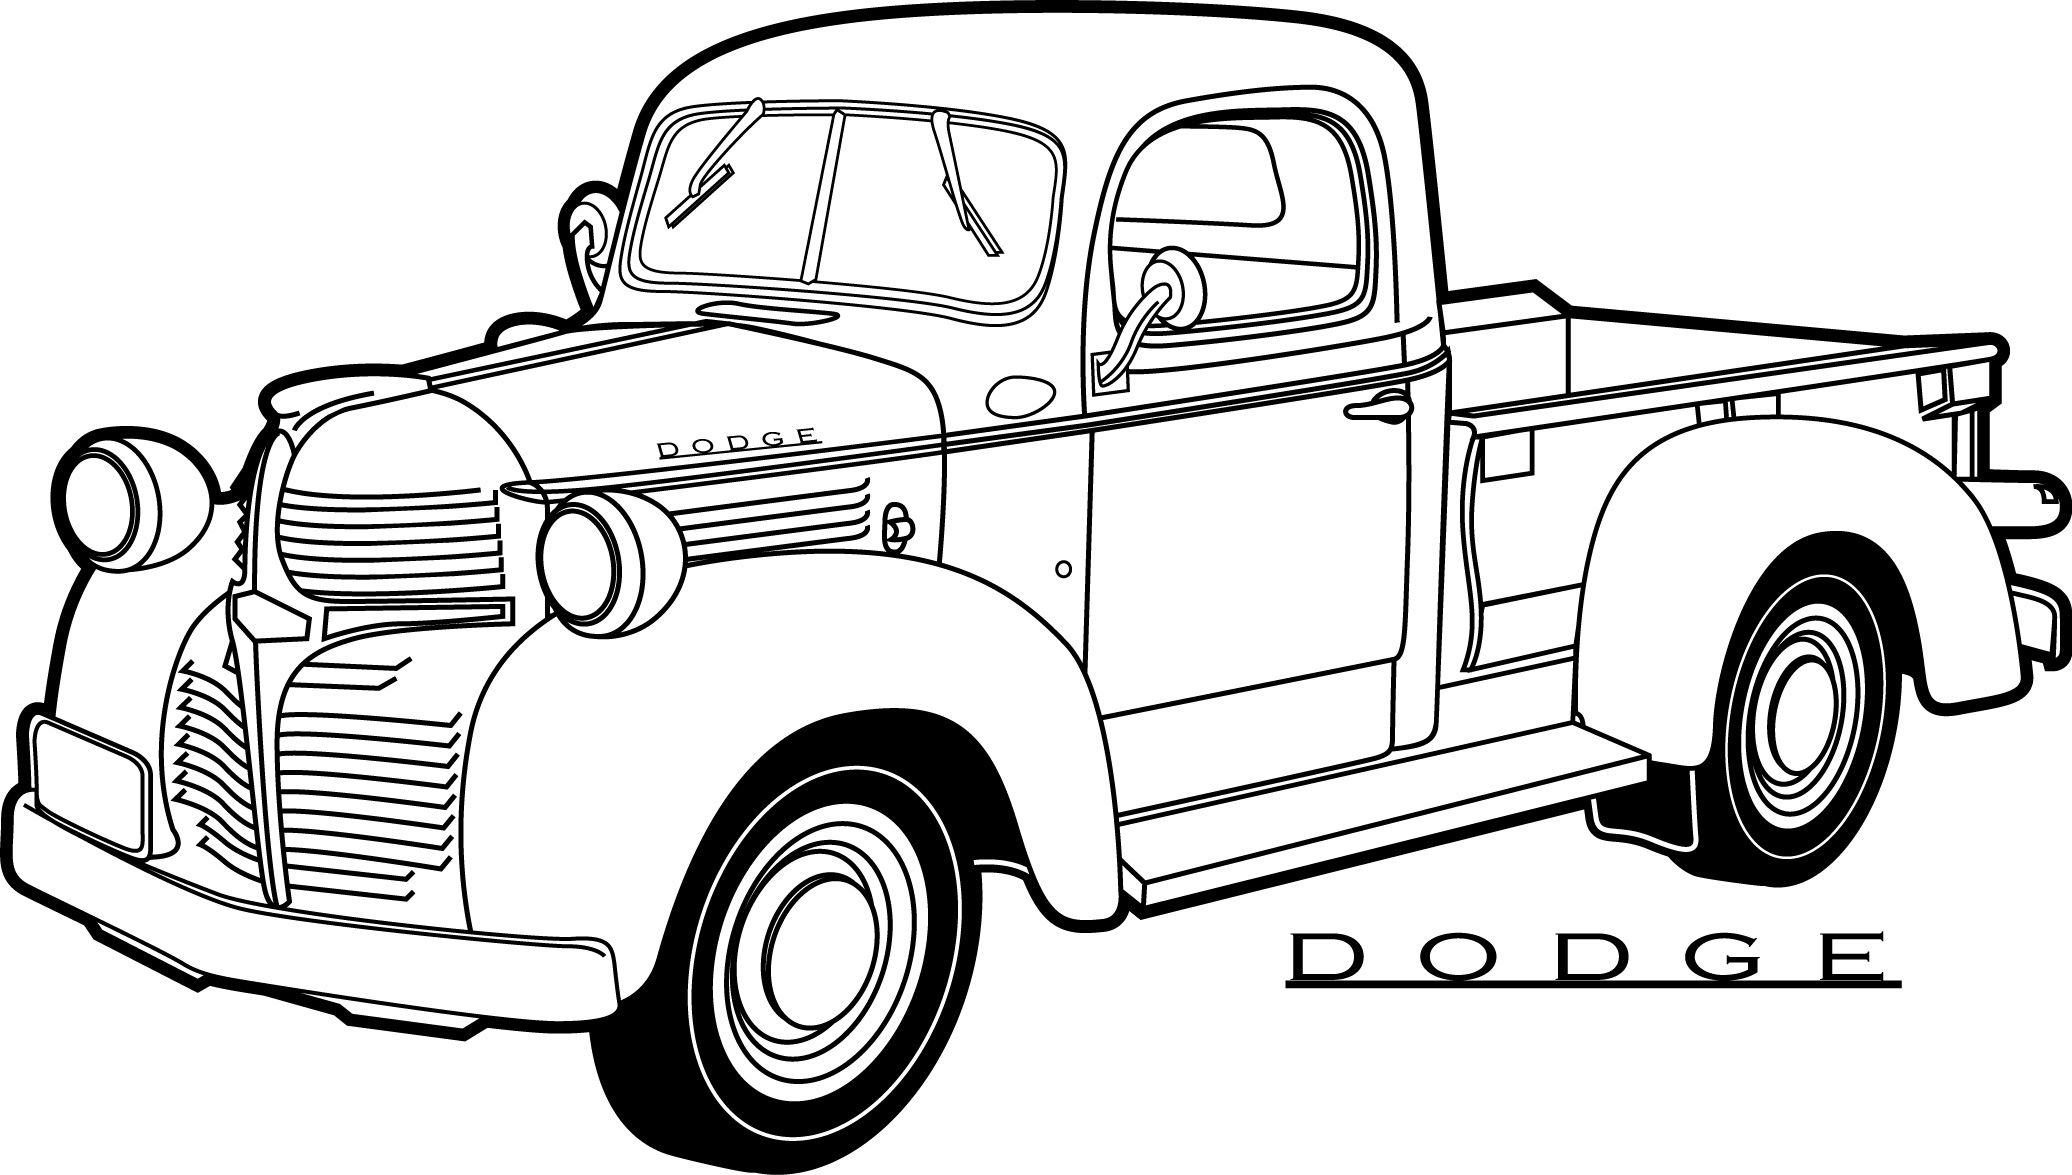 Hot Rod Car Coloring Pages at GetColorings.com | Free printable